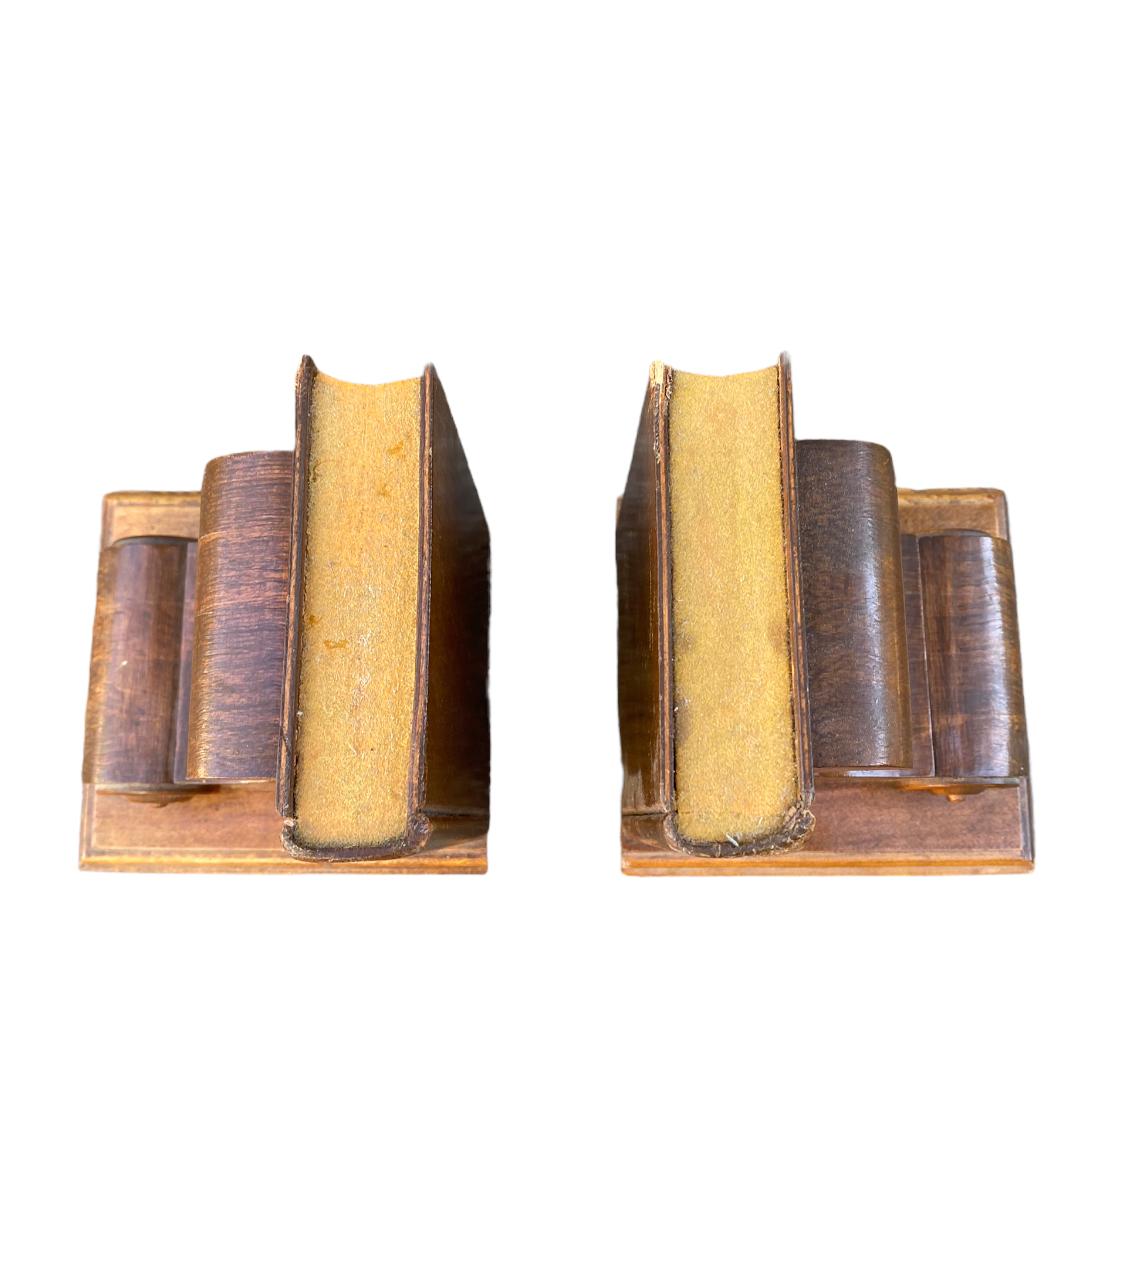 American Craftsman Antique Bookends with Academic Motif